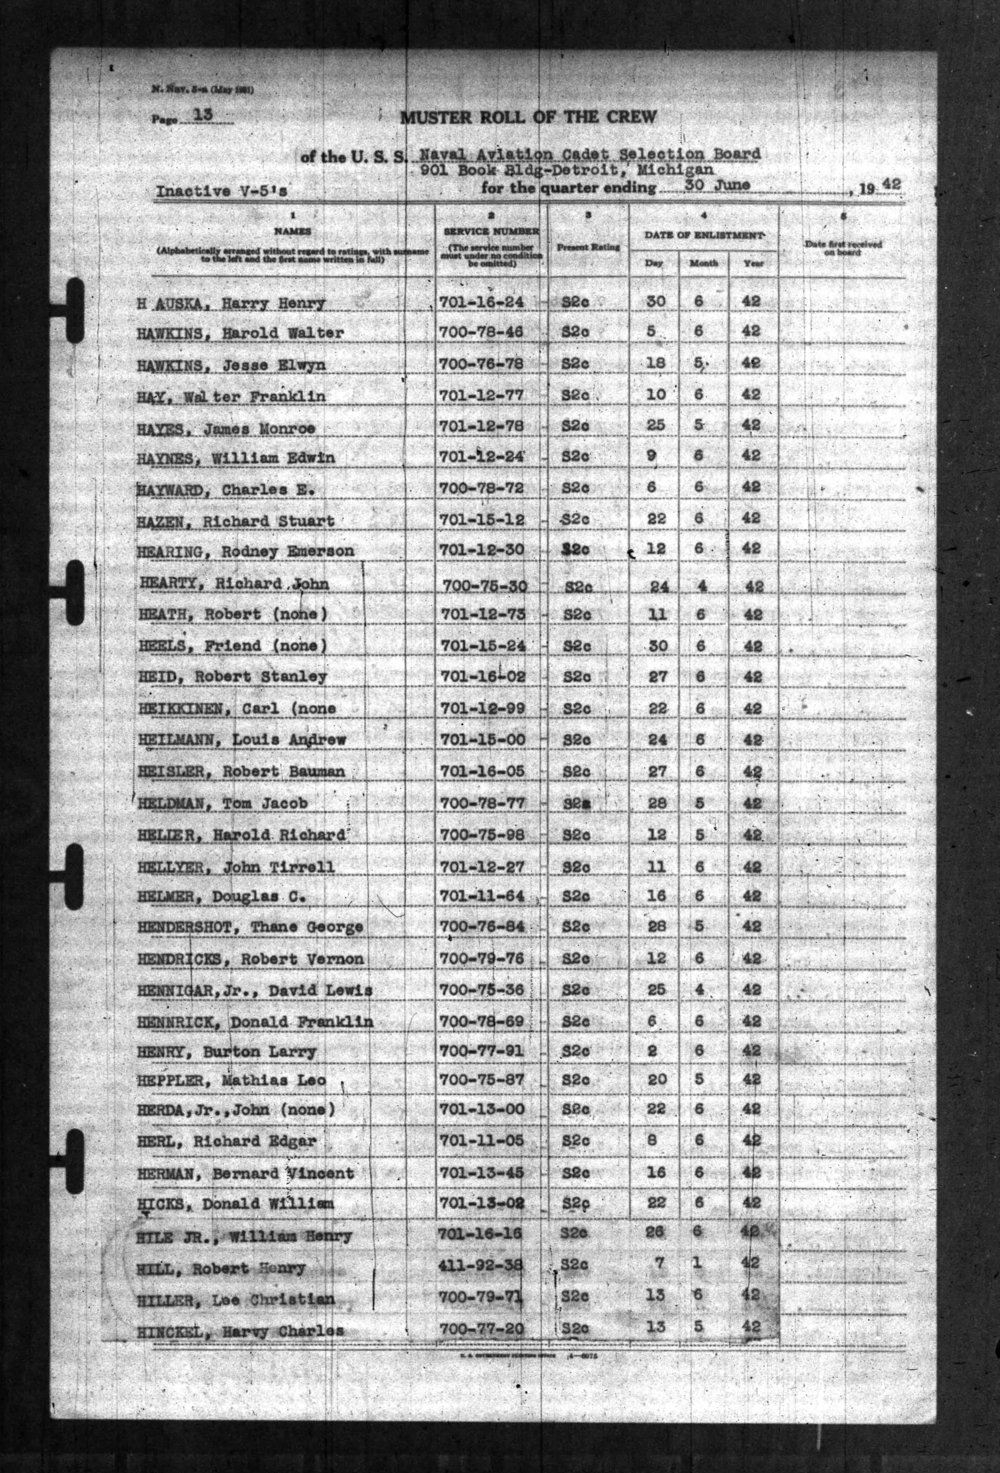 Muster Roll of Cadet Selection Board